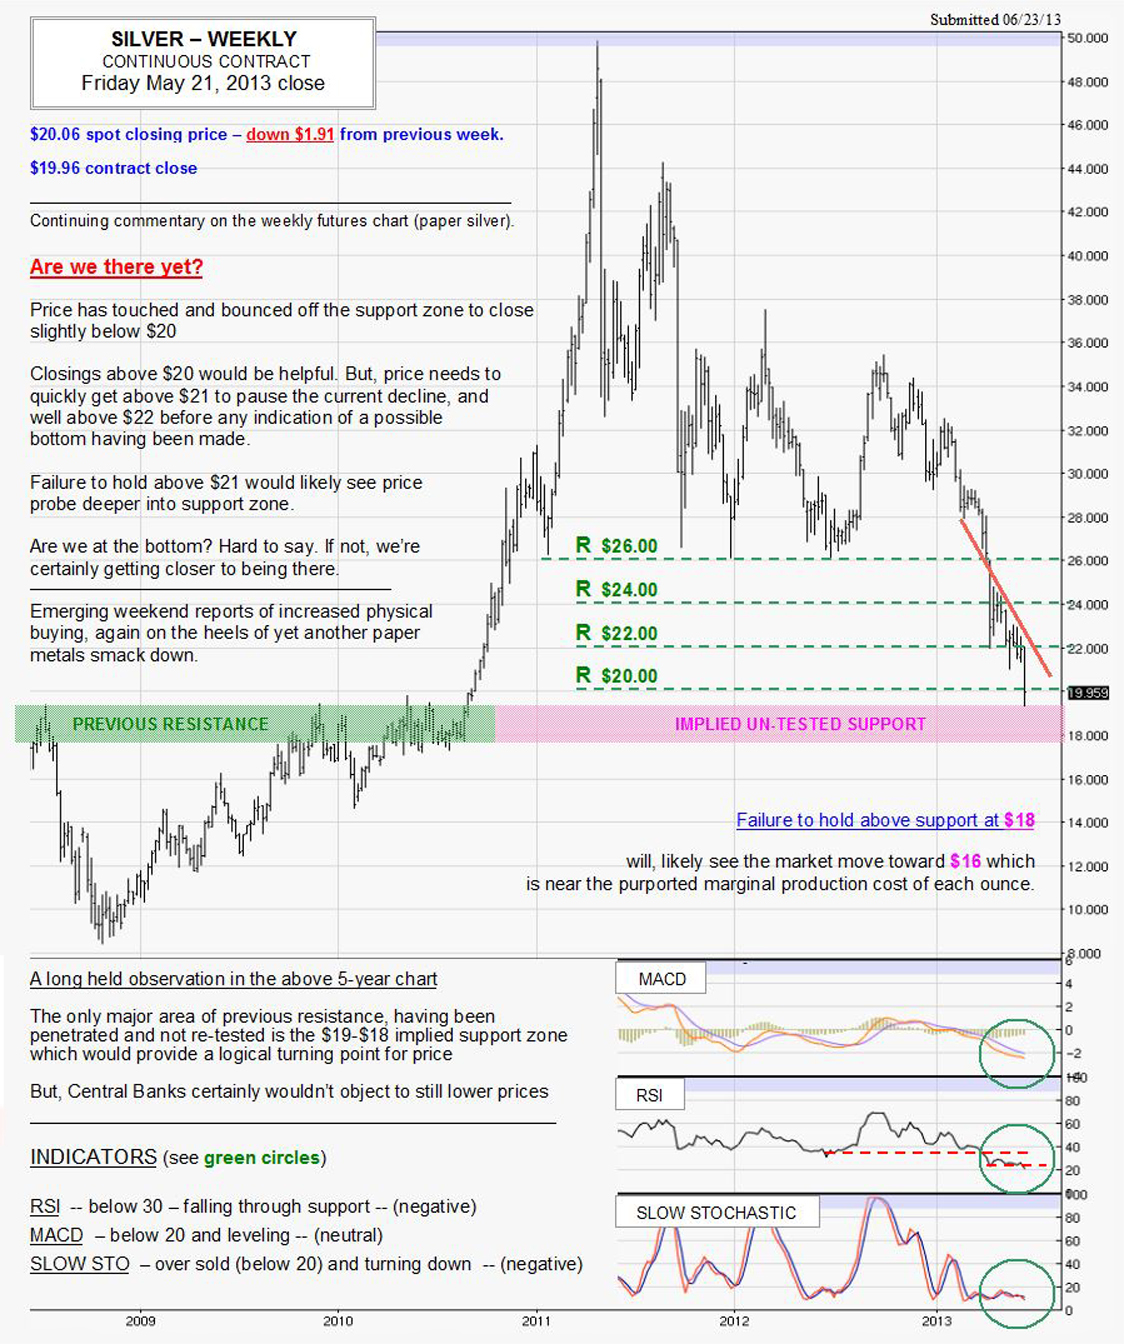 JUNE 21, 2013 chart & commentary